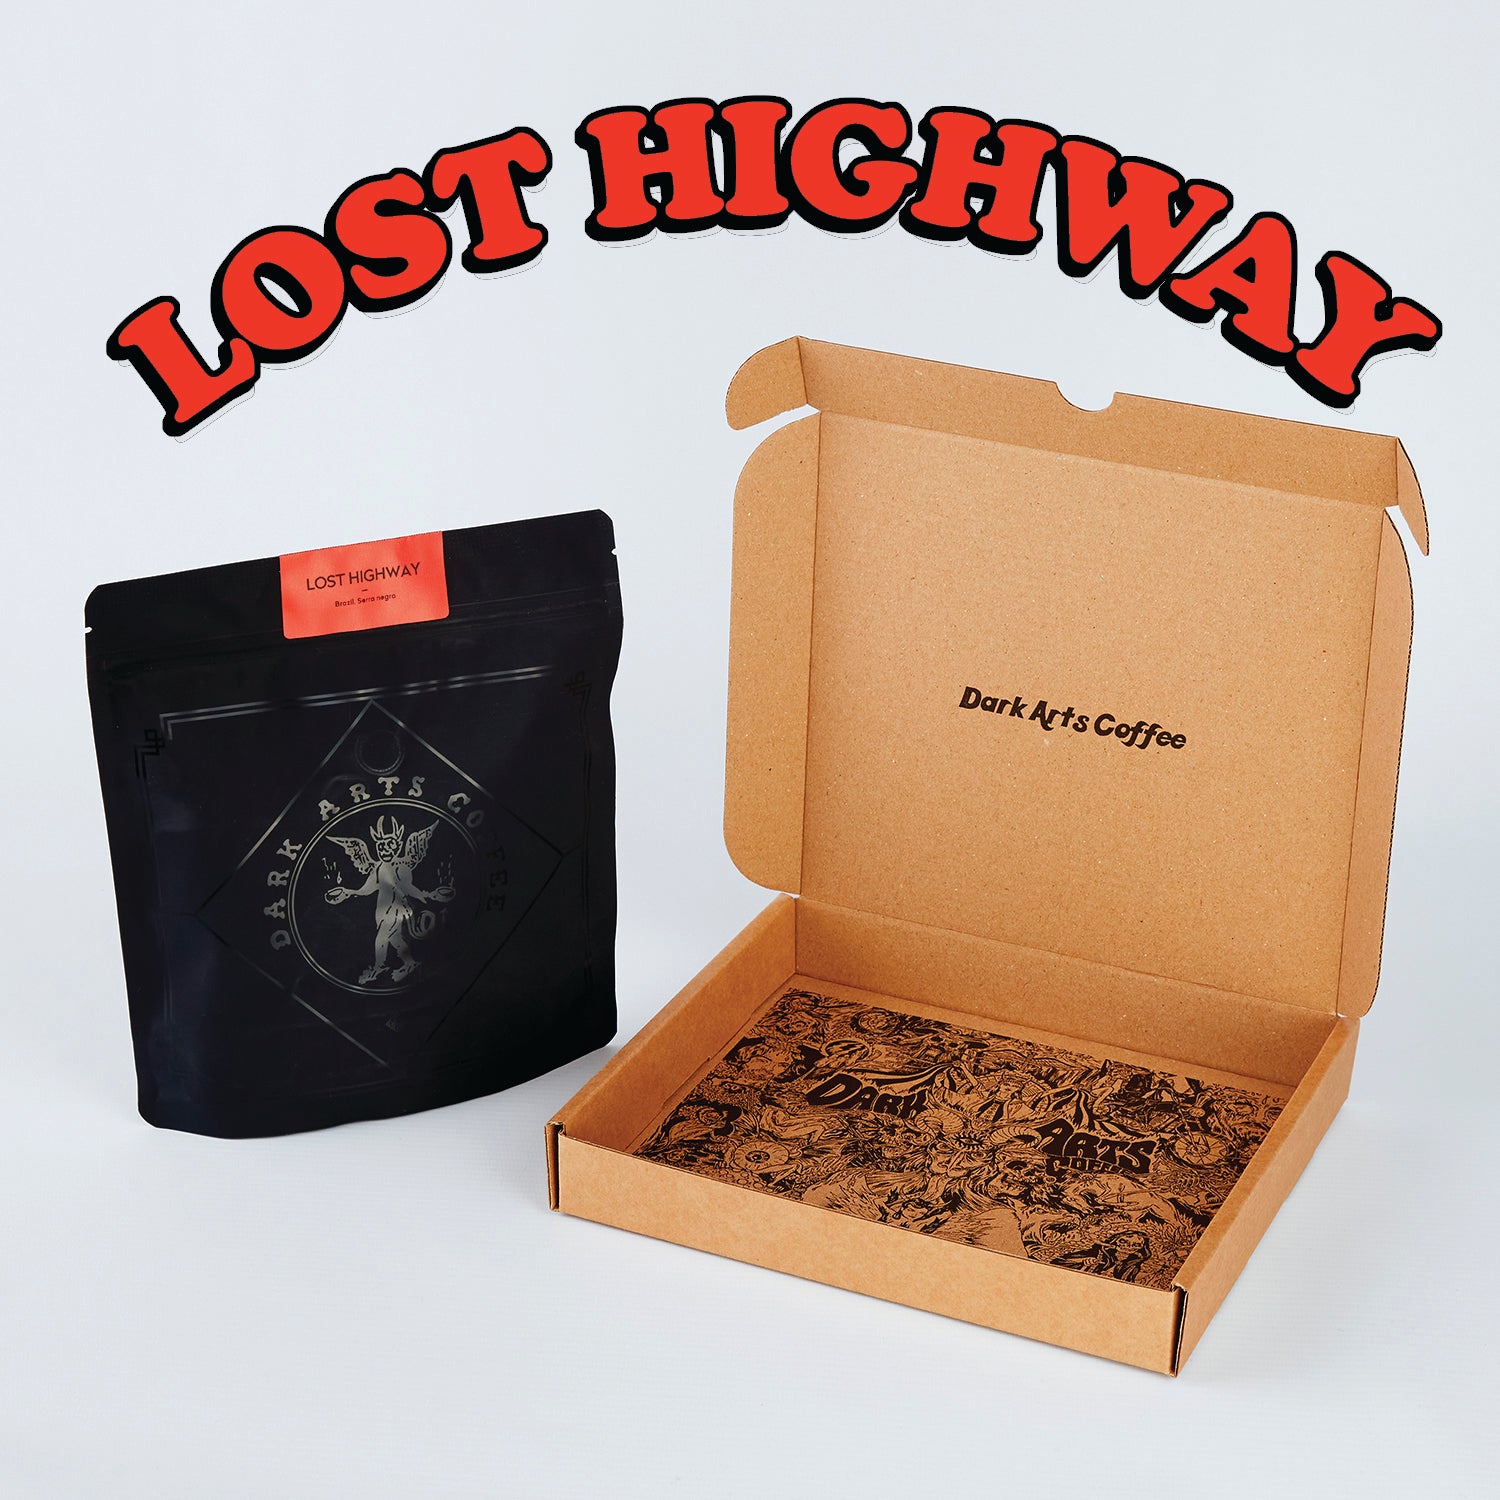 LOST HIGHWAY SUBSCRIPTION